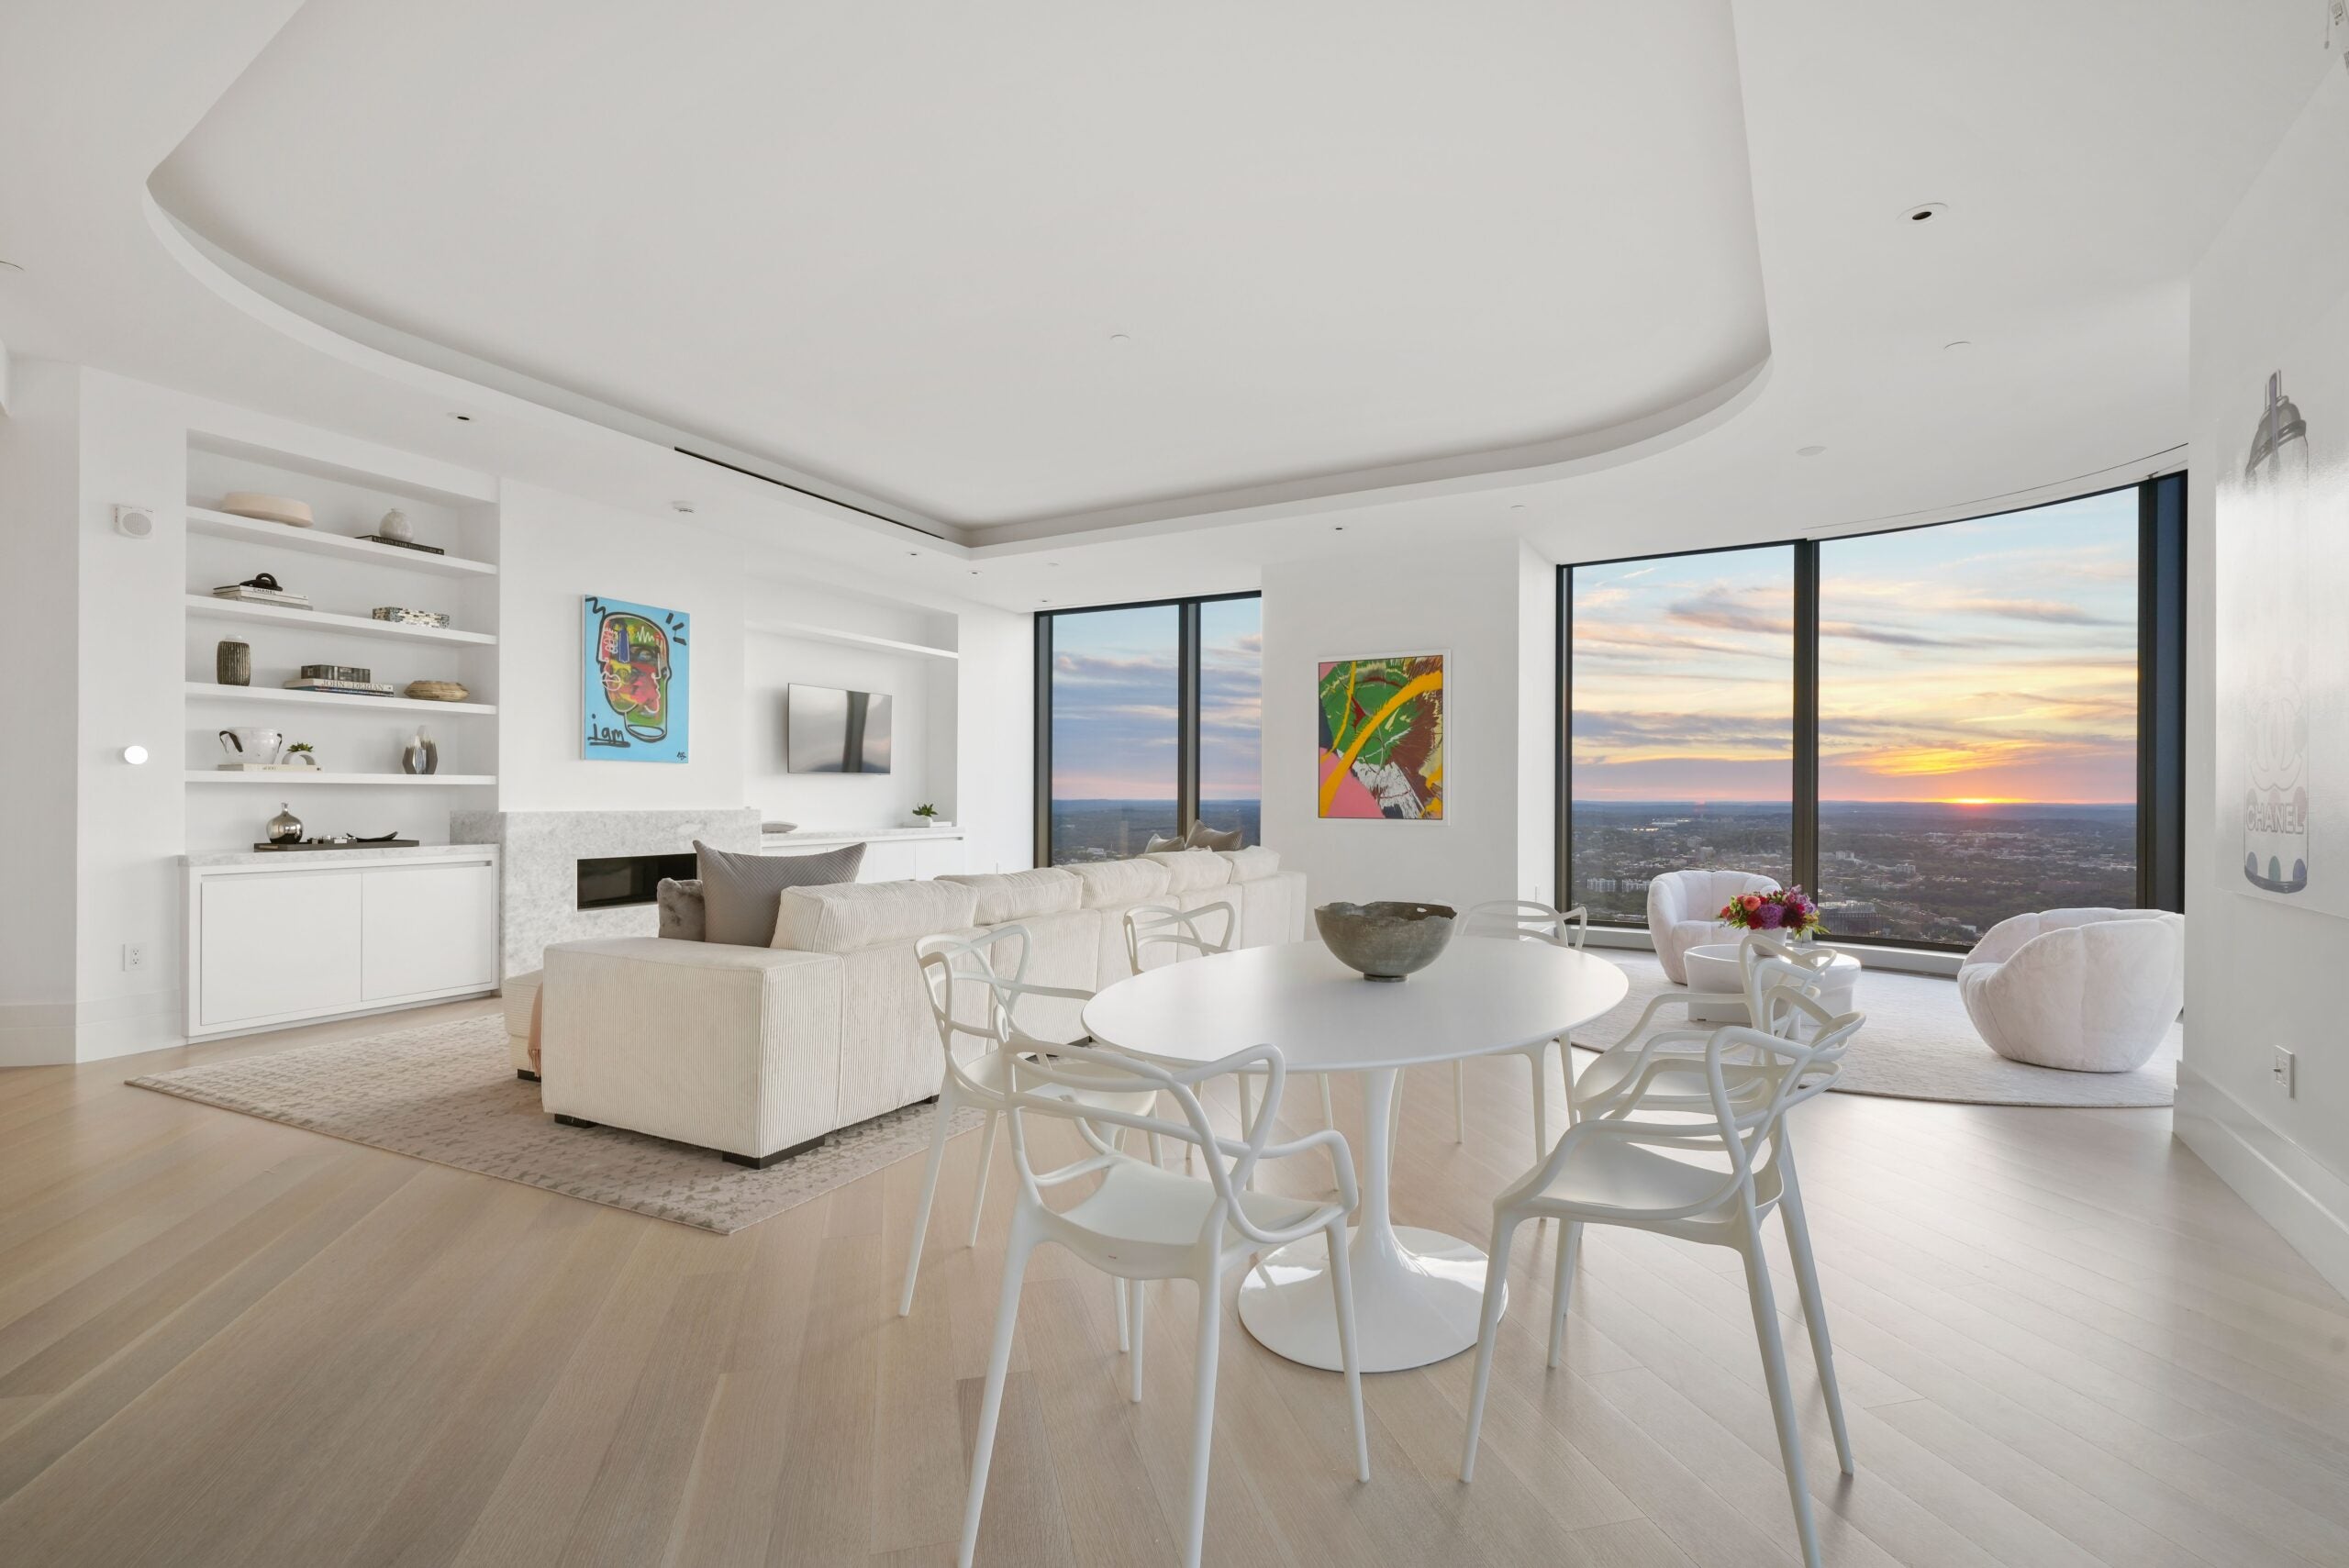 One Dalton living room with couch, seating area, fireplace, casual eating area and sweeping views of the city. Sun just above the horizon in the distance. Hardwood floors in space.